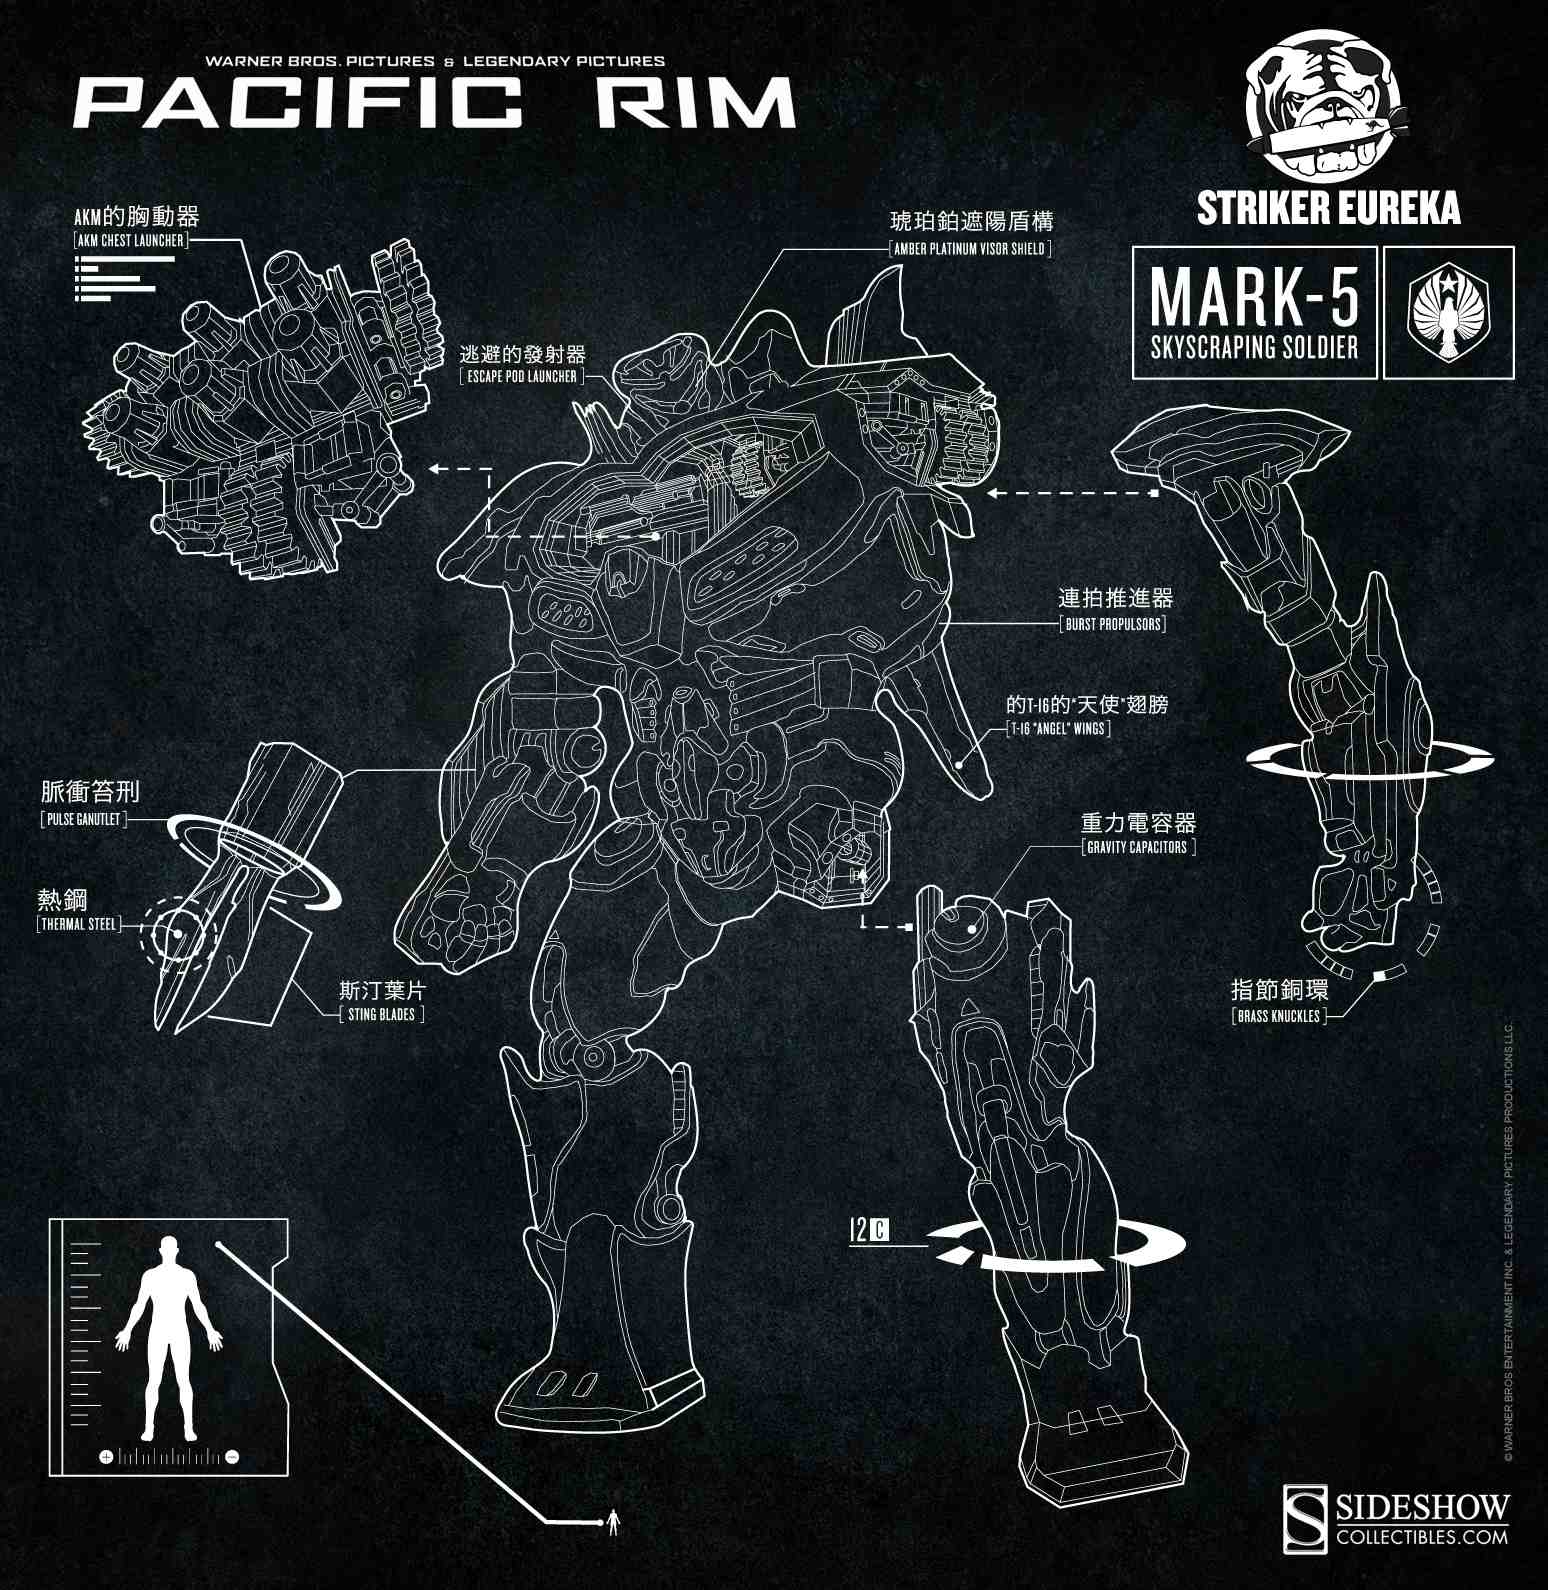 Win a Set of Pacific Rim Statues from Sideshow Collectibles